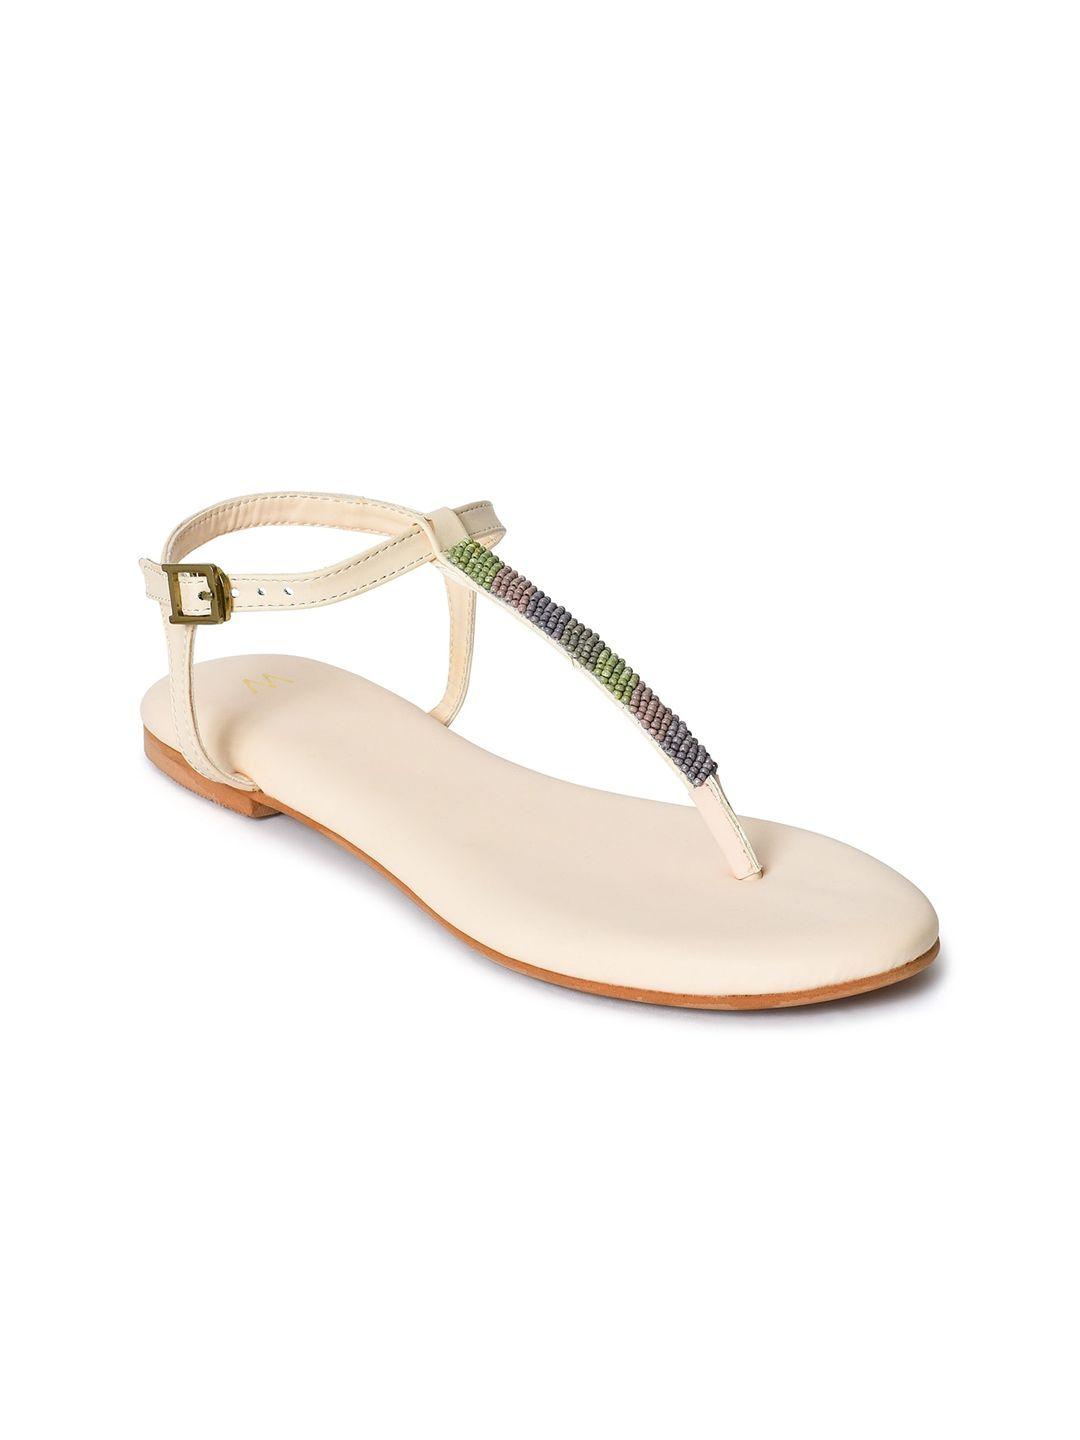 w beads embellished t-strap flats